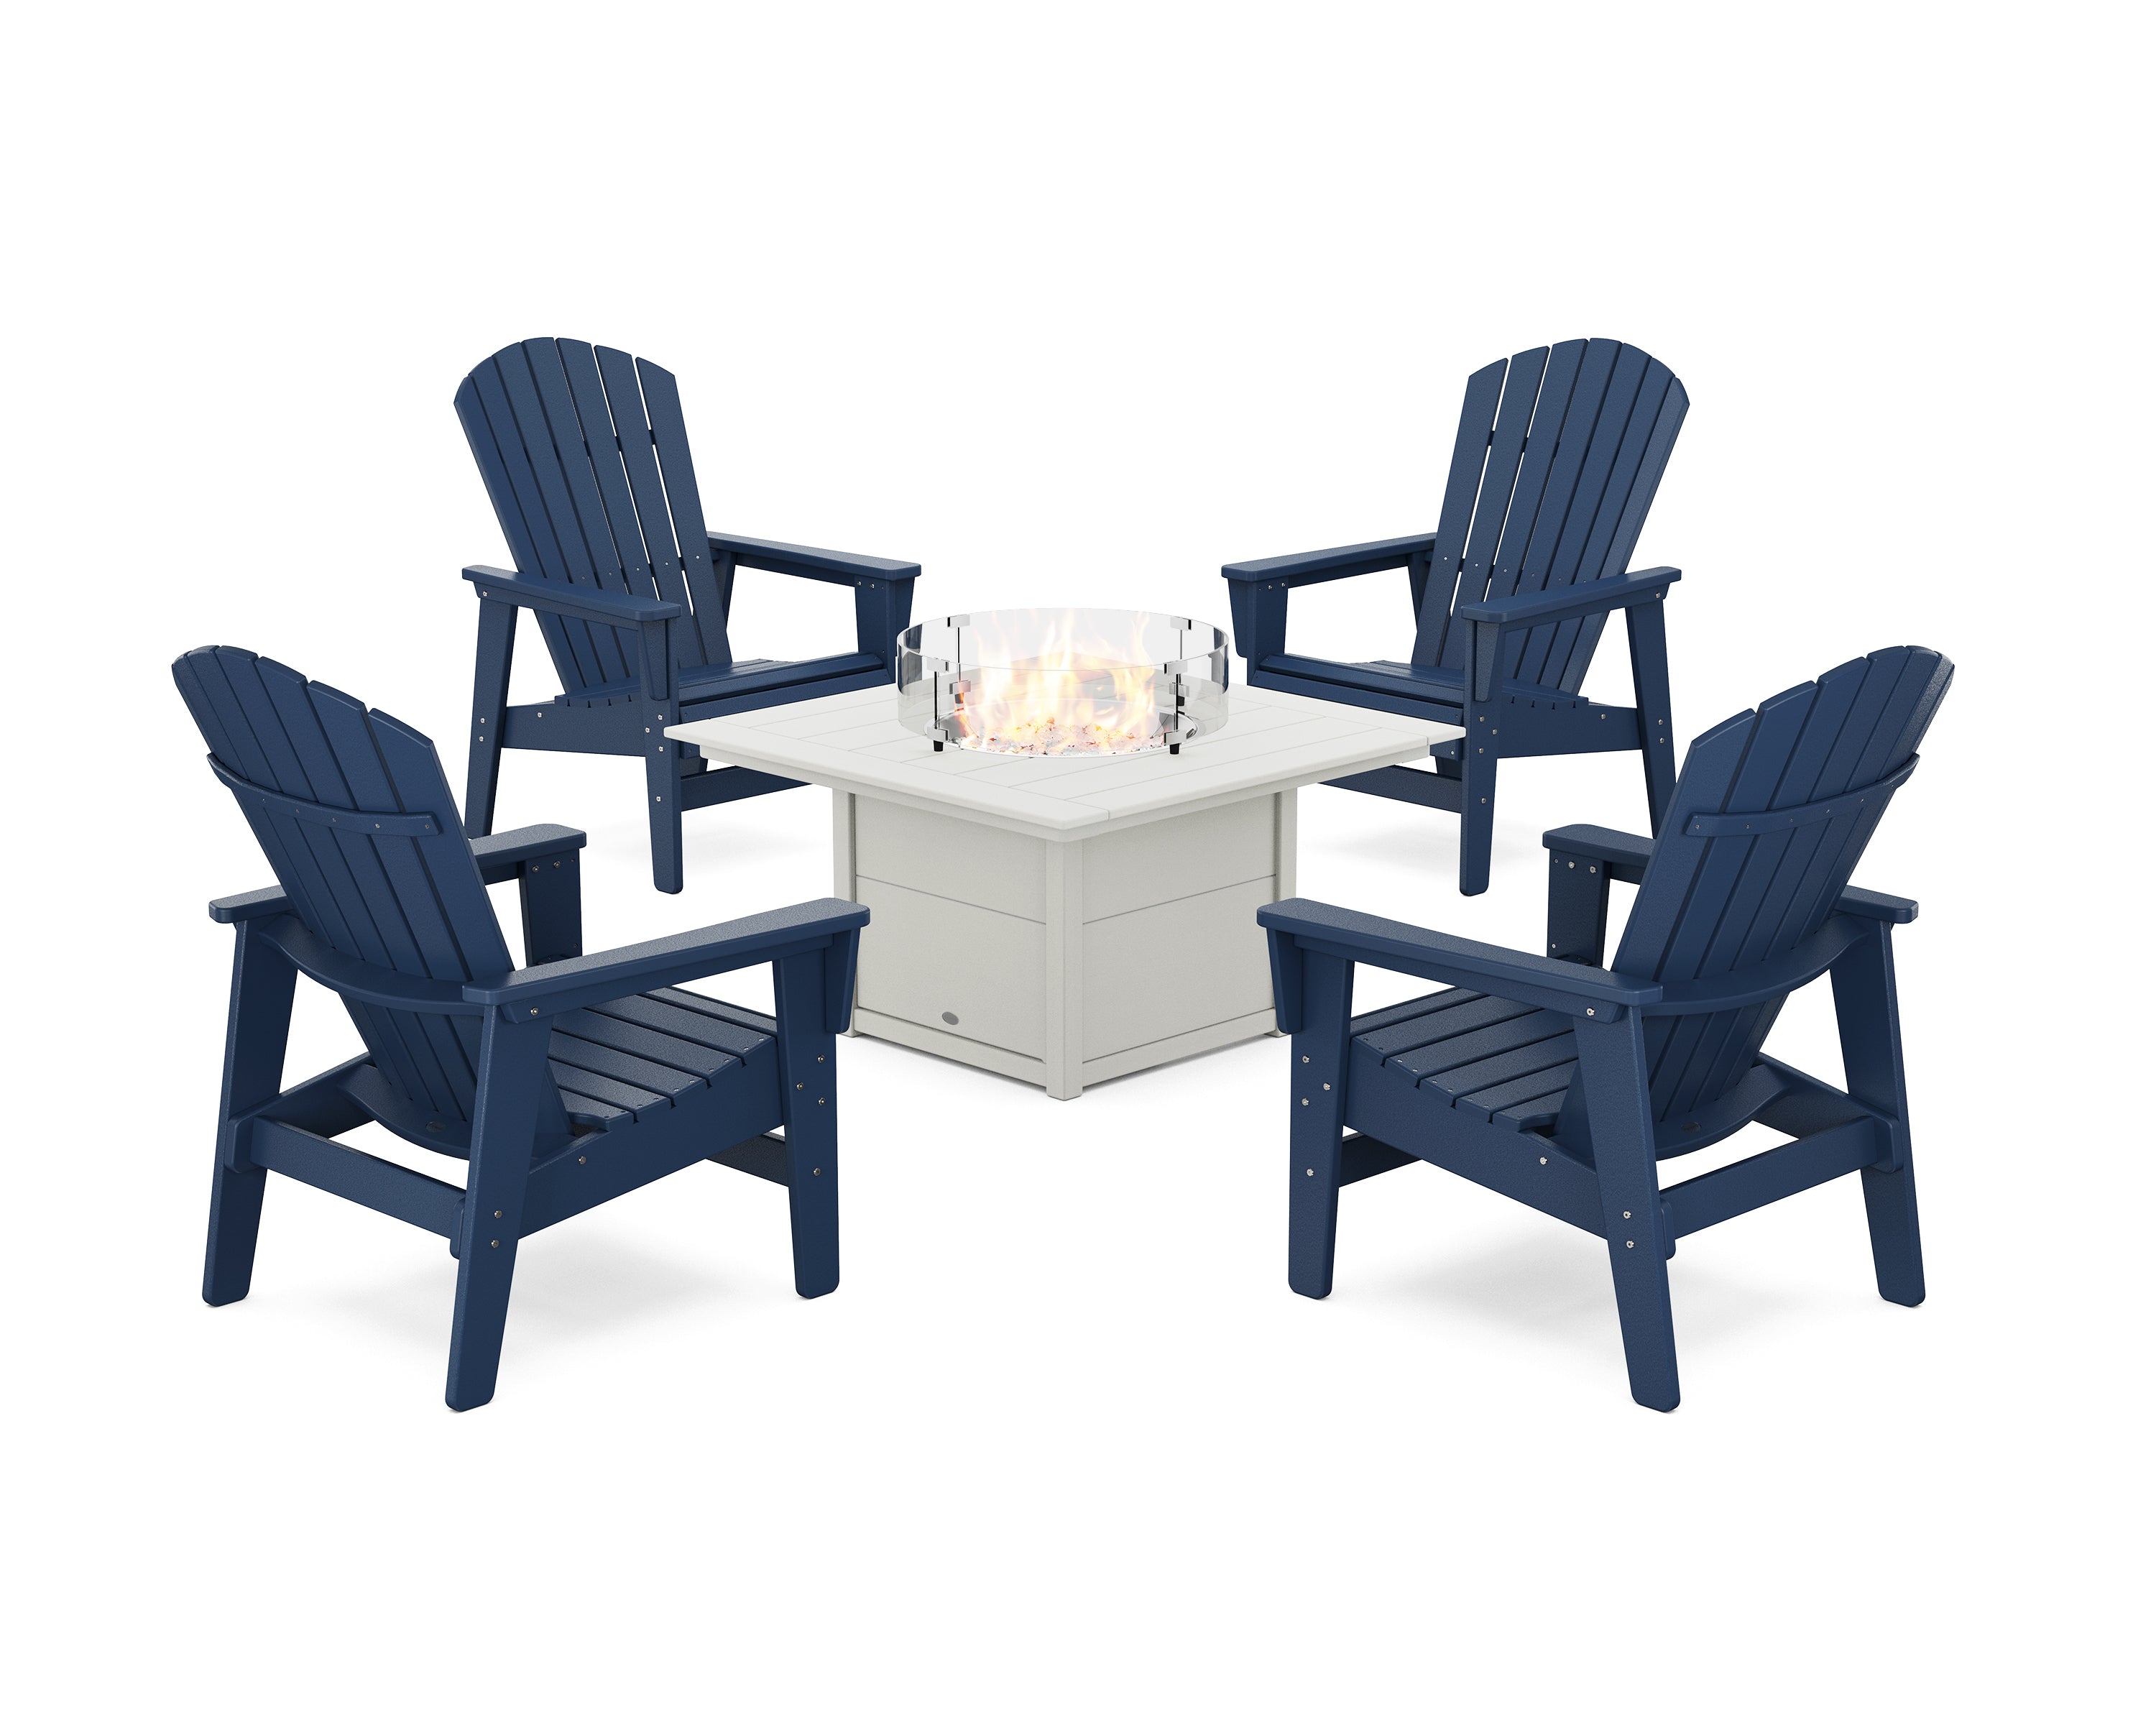 POLYWOOD® 5-Piece Nautical Grand Upright Adirondack Conversation Set with Fire Pit Table in Navy / White